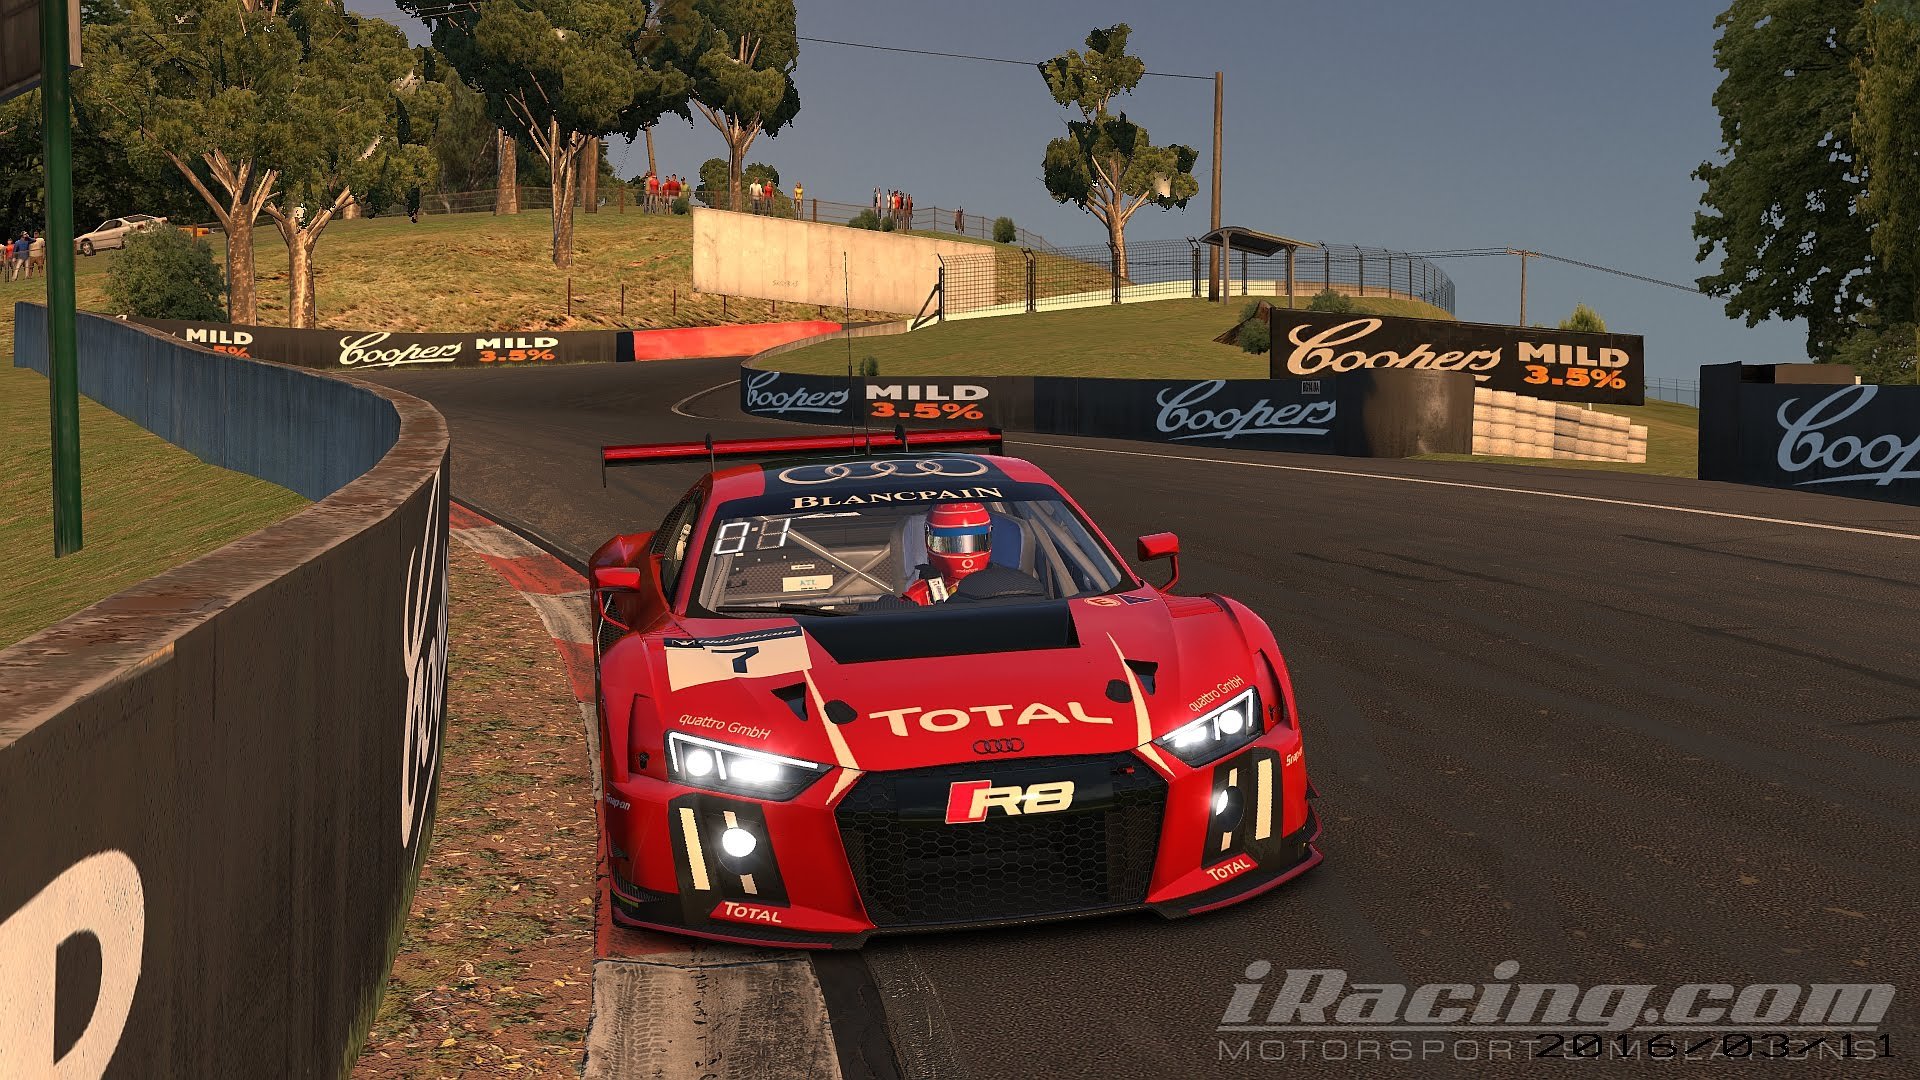 More information about "iRacing Bathurst 12 Hours LIVE dalle 14,30"